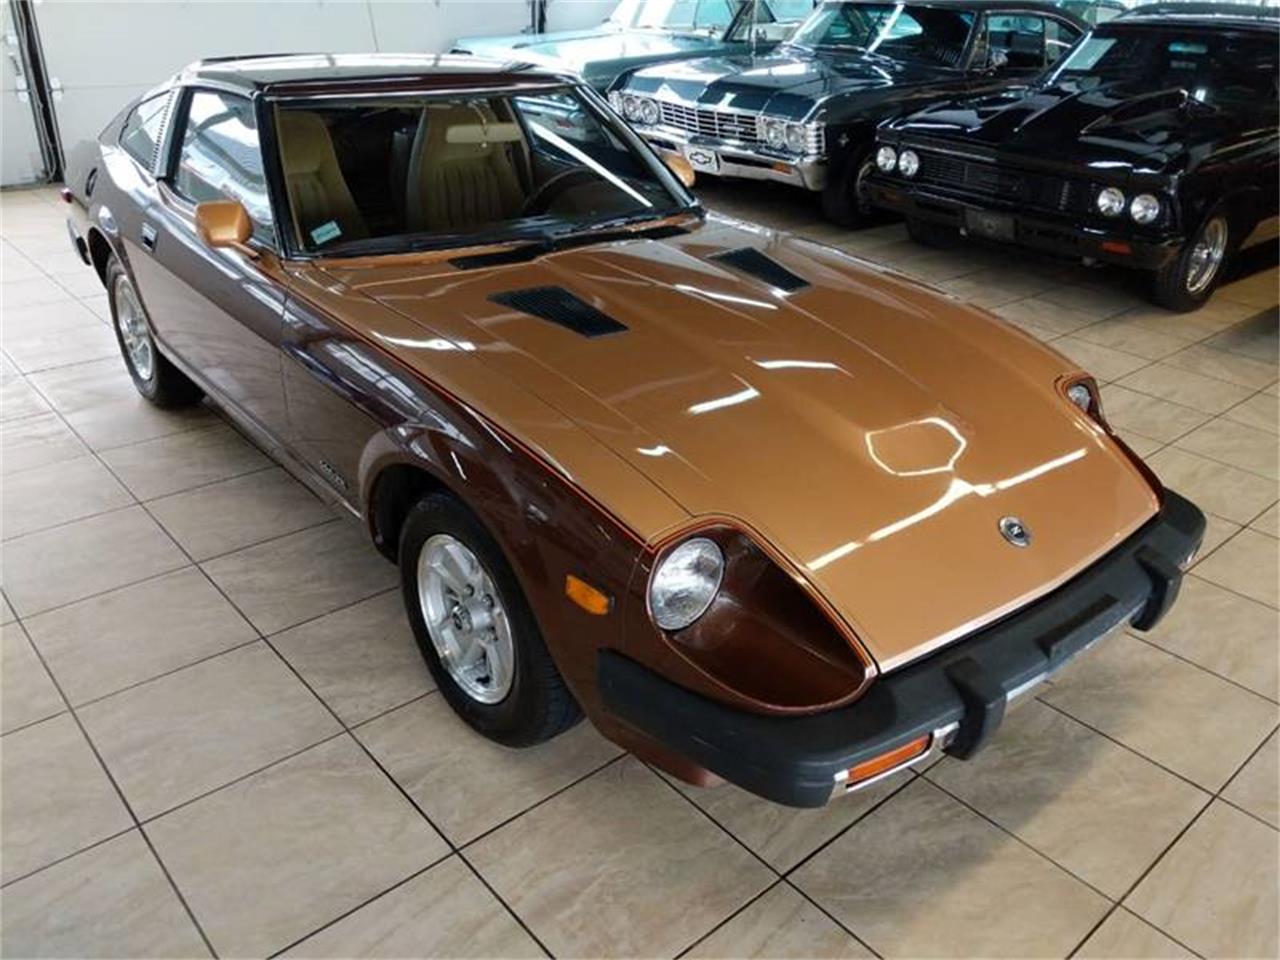 1979 Datsun 280ZX for sale in St. Charles, IL – photo 82